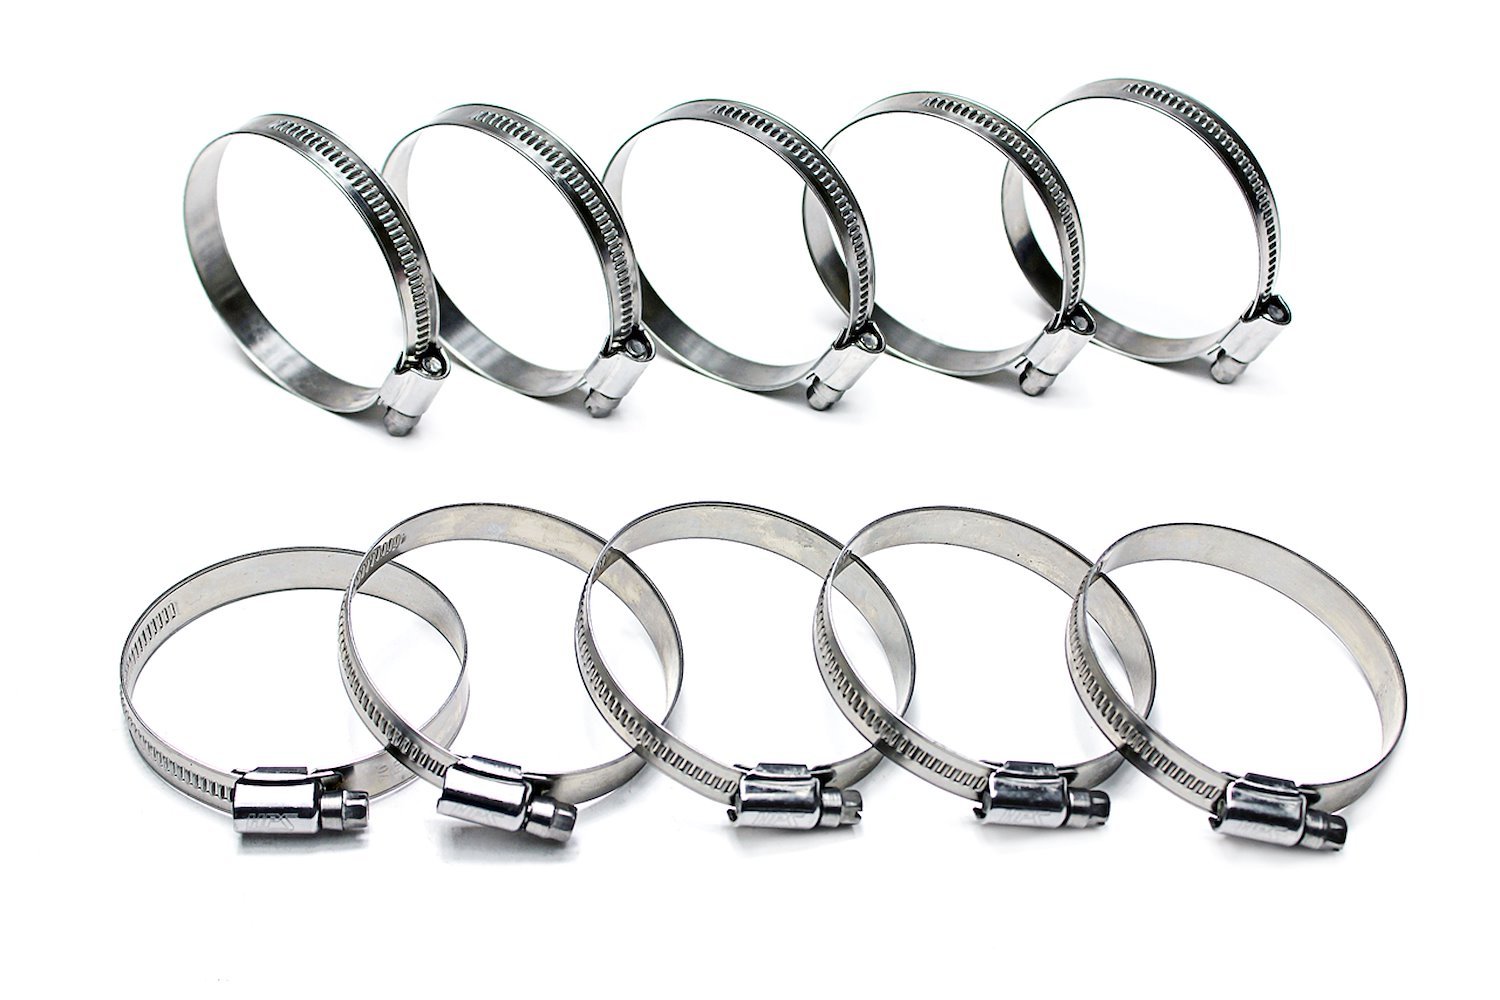 EMSC-12-22x10 Embossed Hose Clamp, Stainless Steel Embossed Hose Clamp, Size #6, Effective Range: 1/2 in.- 13/16 in., 10Pc